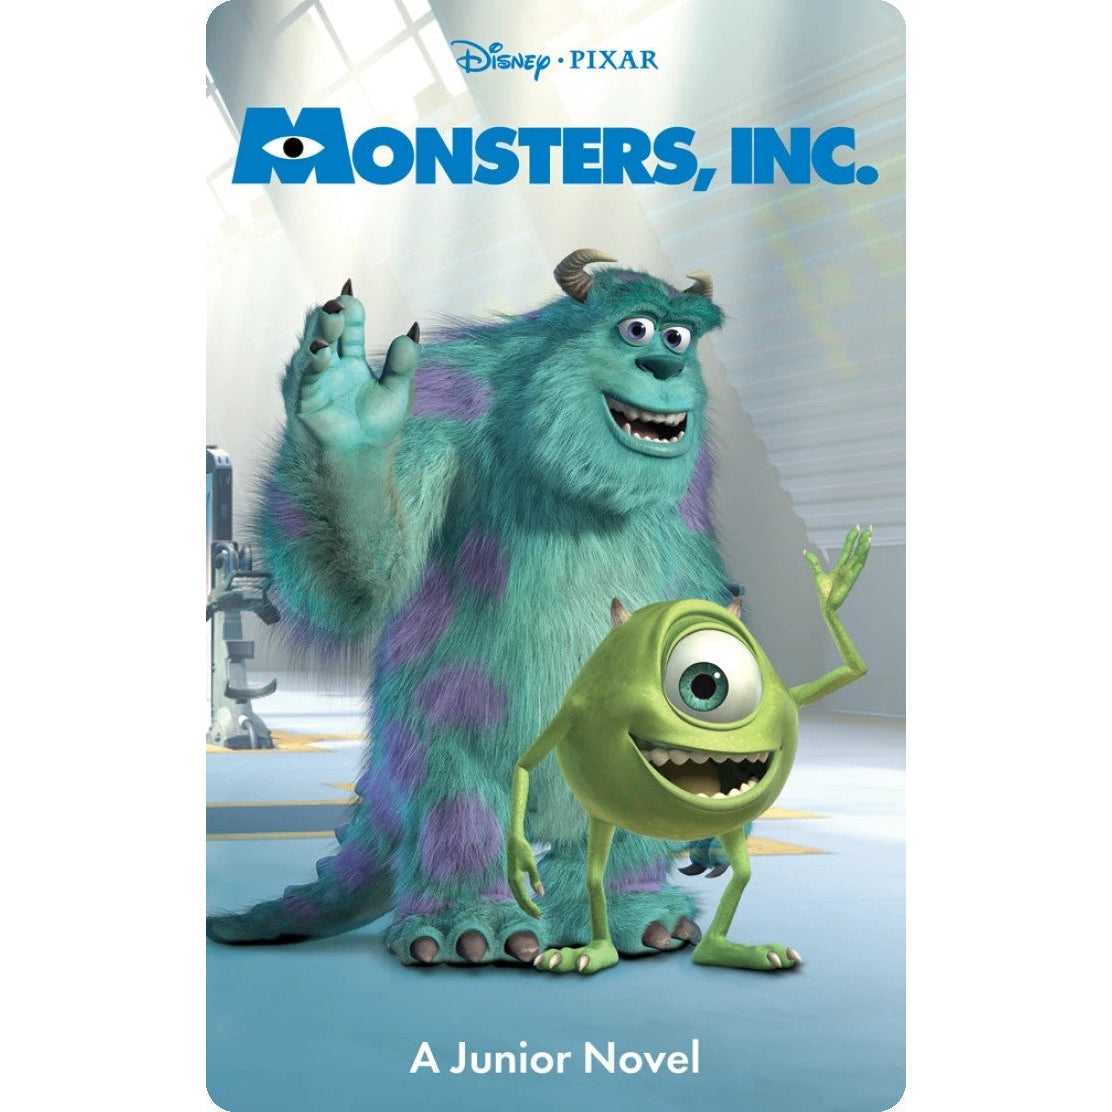 Yoto Card - Disney Pixar Monsters Inc - Child Friendly Audio Story Card for the Yoto Player